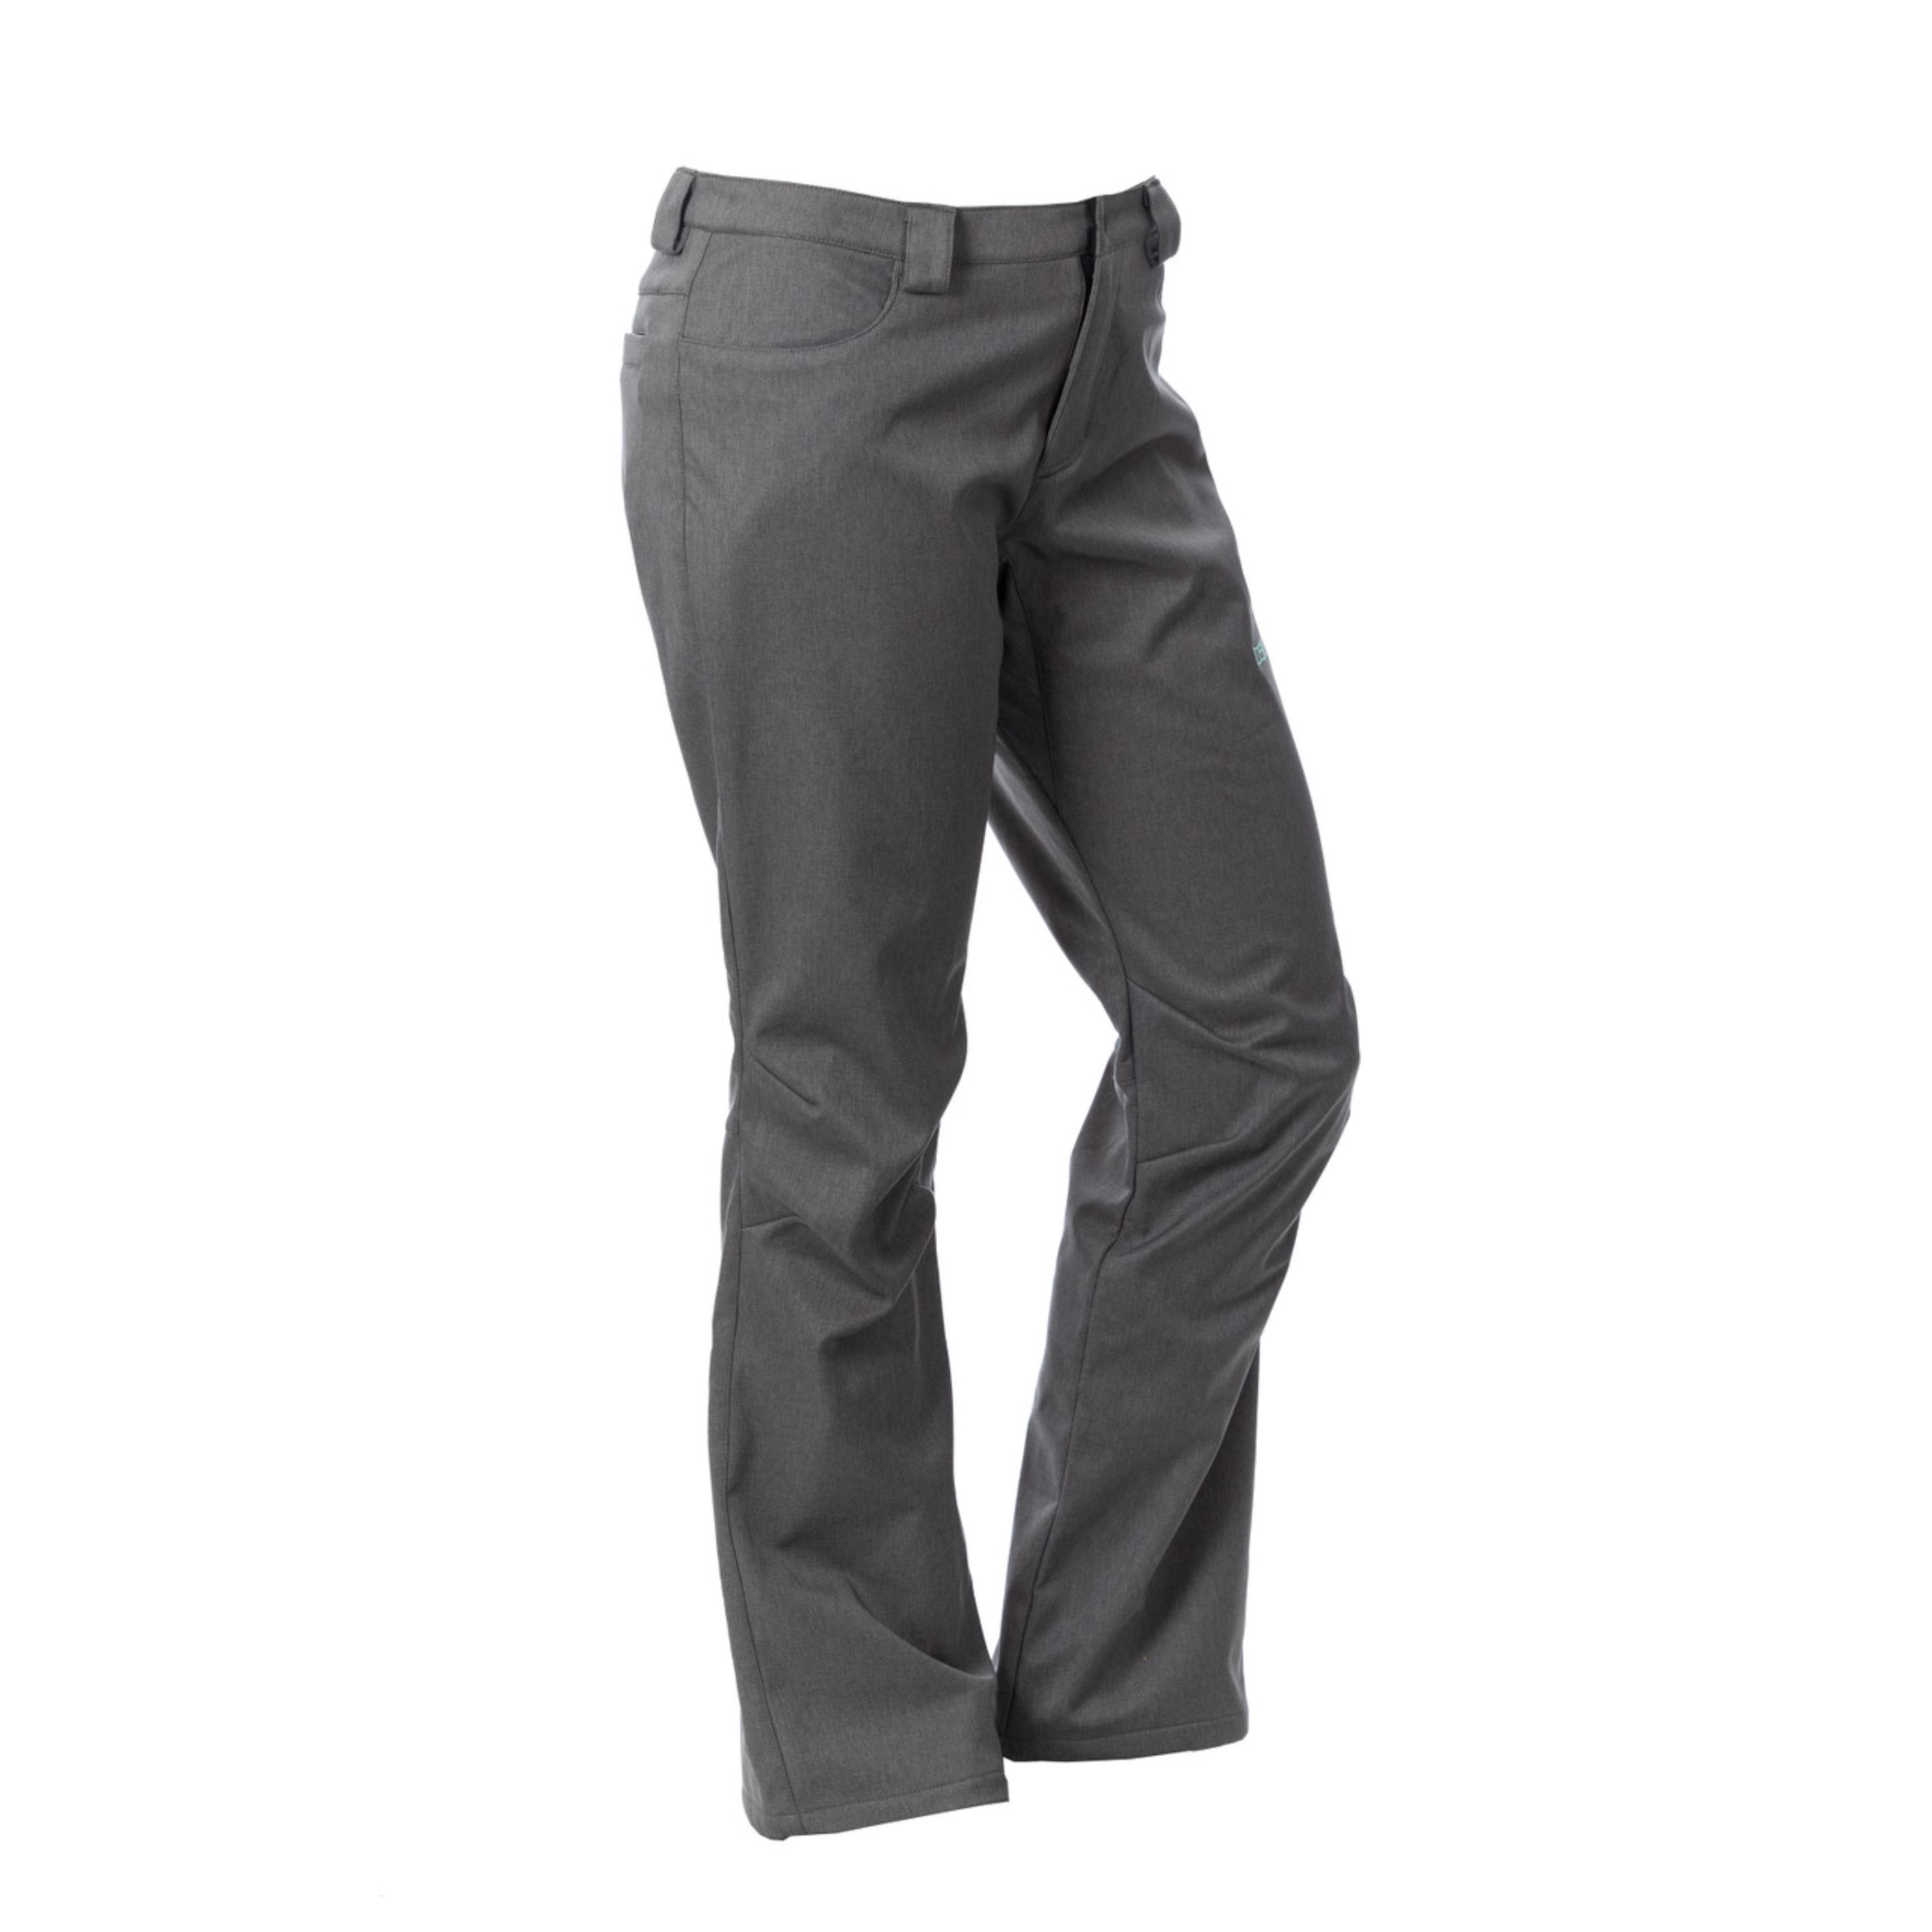 Parliament 4S Designs Everyday Pant - Charcoal